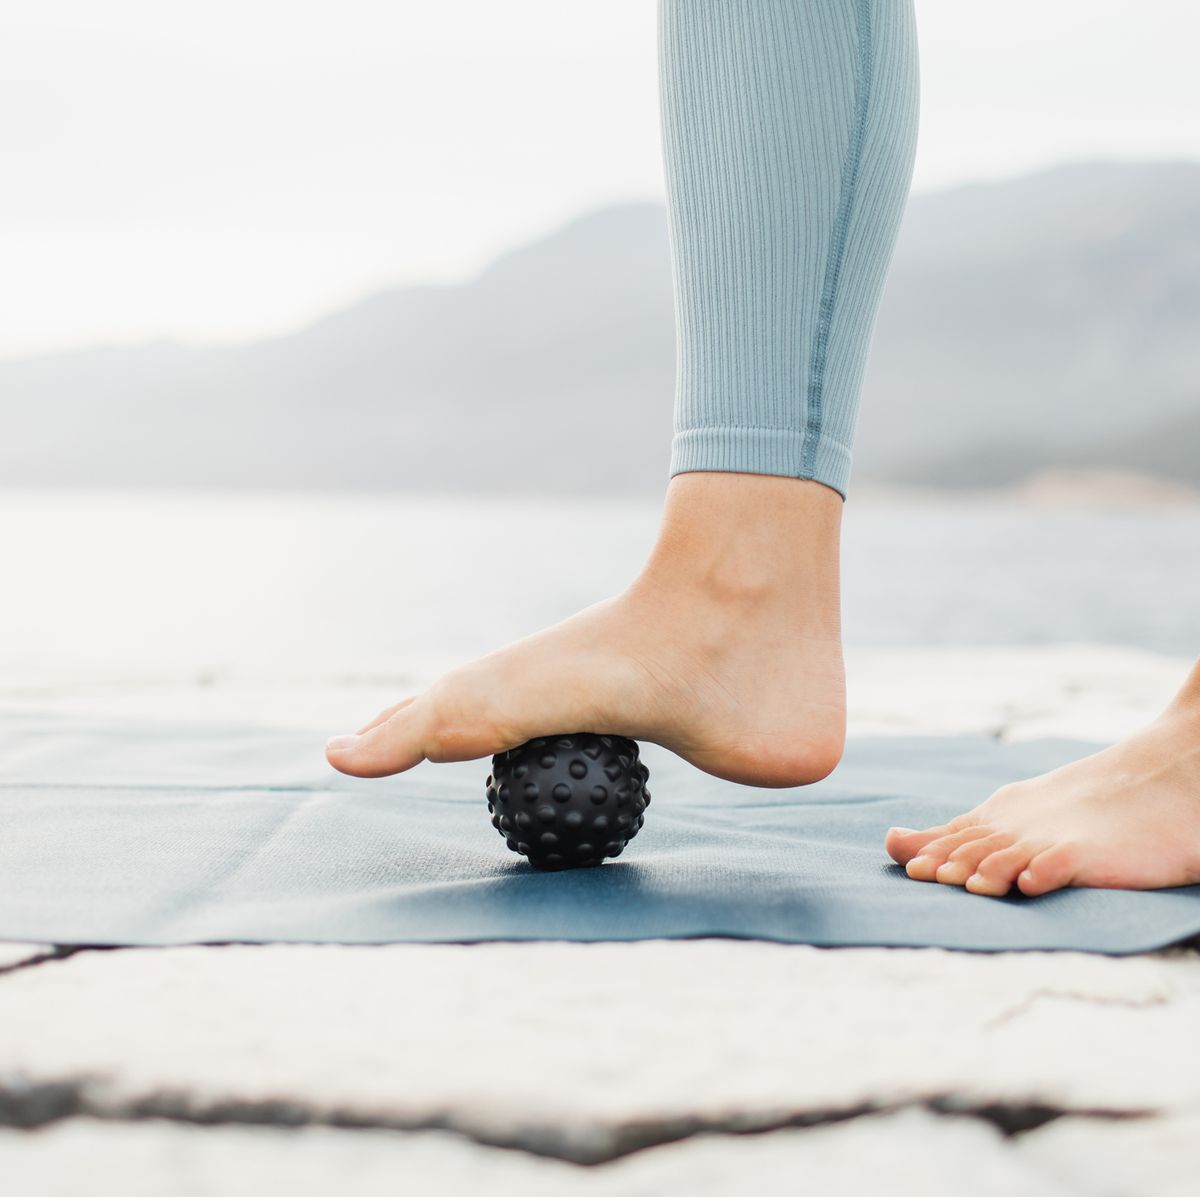 https://hips.hearstapps.com/hmg-prod/images/woman-massaging-foot-with-black-massage-ball-roller-royalty-free-image-1663853521.jpg?crop=0.668xw:1.00xh;0.167xw,0&resize=1200:*